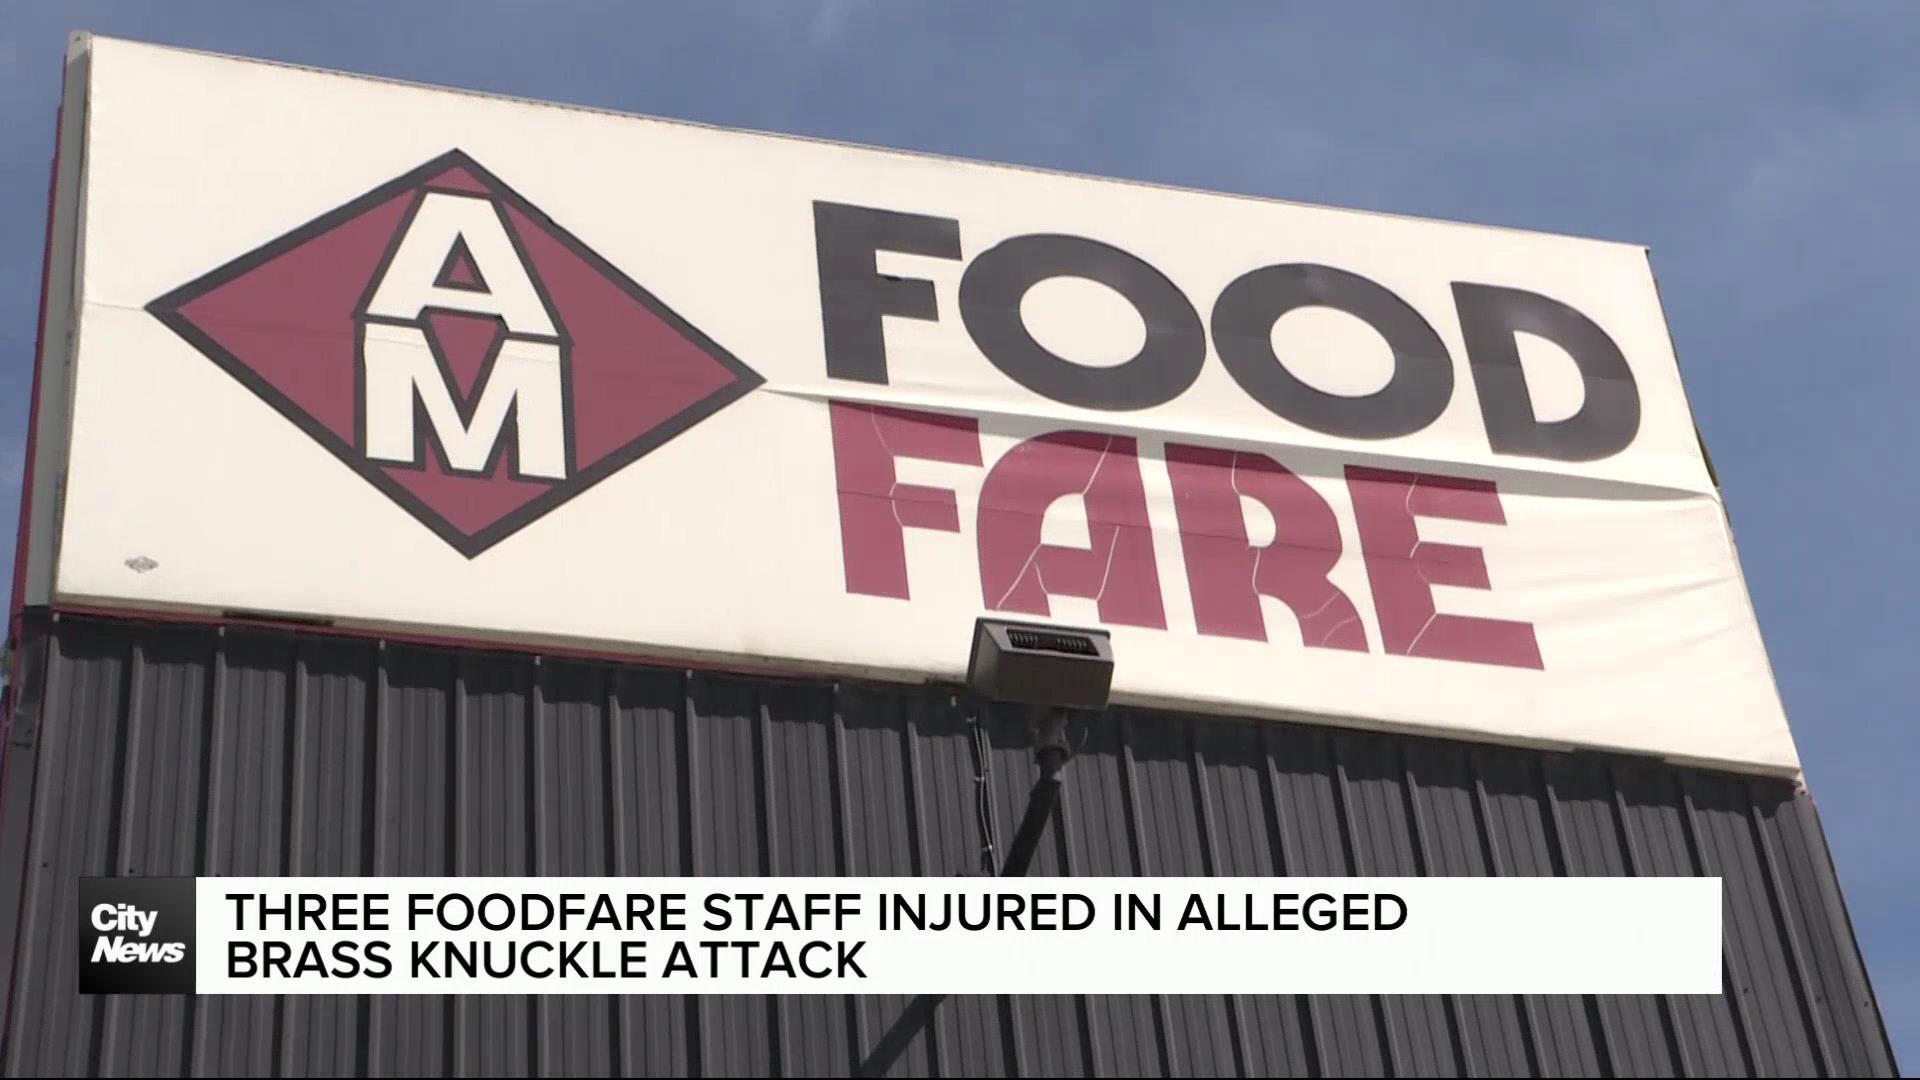 Brass knuckles recovered, three employees injured after Winnipeg Food Fare attack